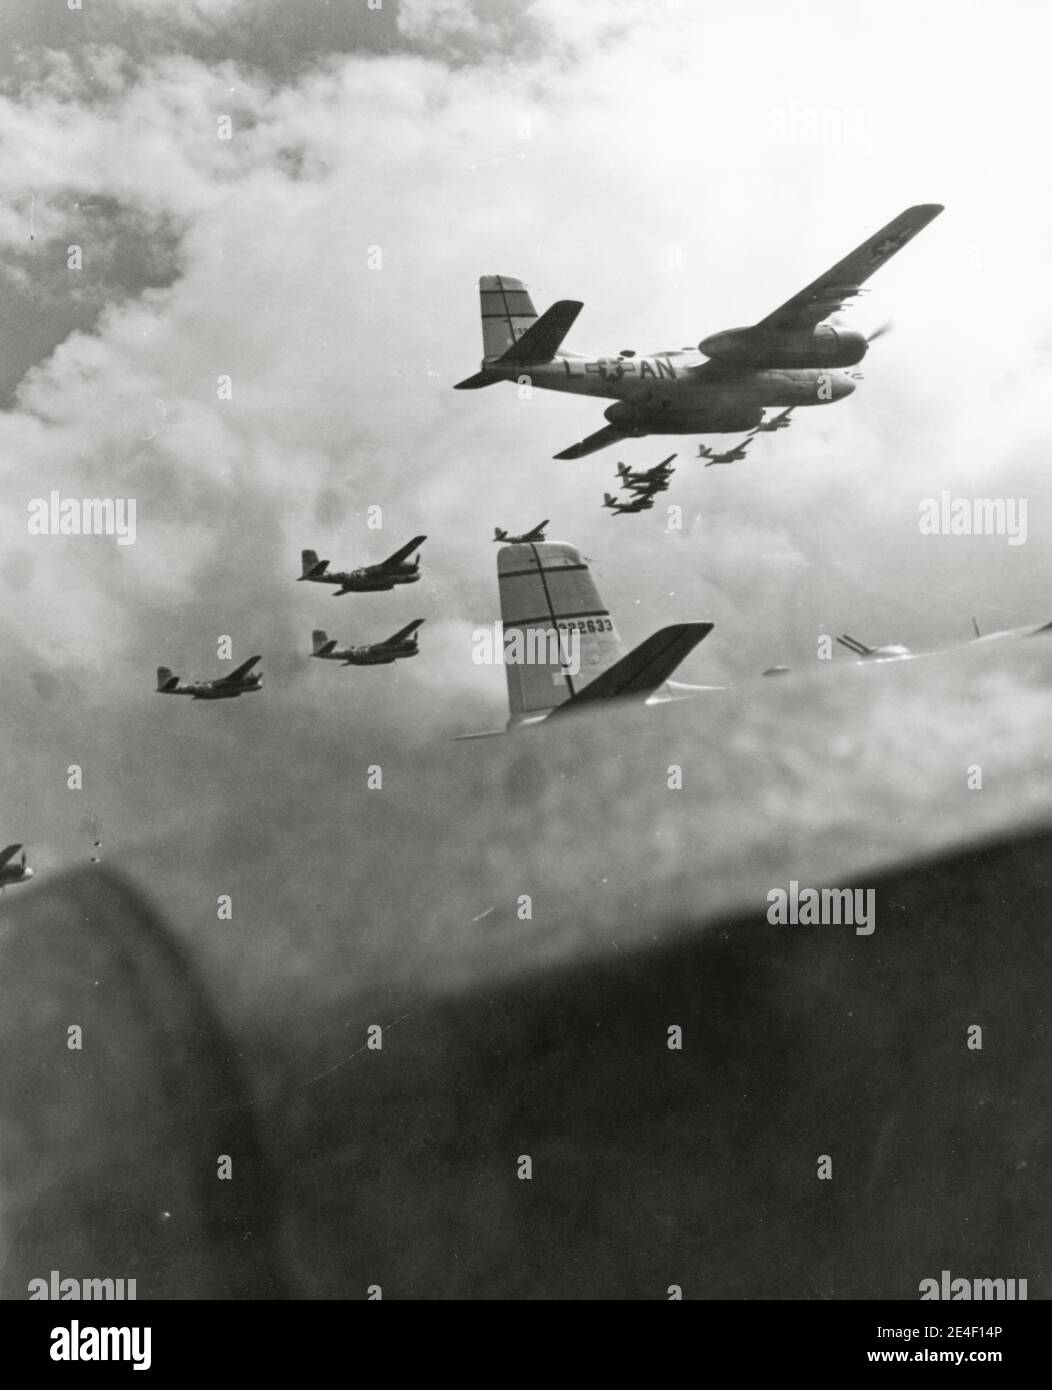 Vintage World War II photograph - official US military photo: silhouette of a flight of Douglas A-26 Invader aircraft of the allied 386th Bomb Group, over Germany April 1945.. Stock Photo